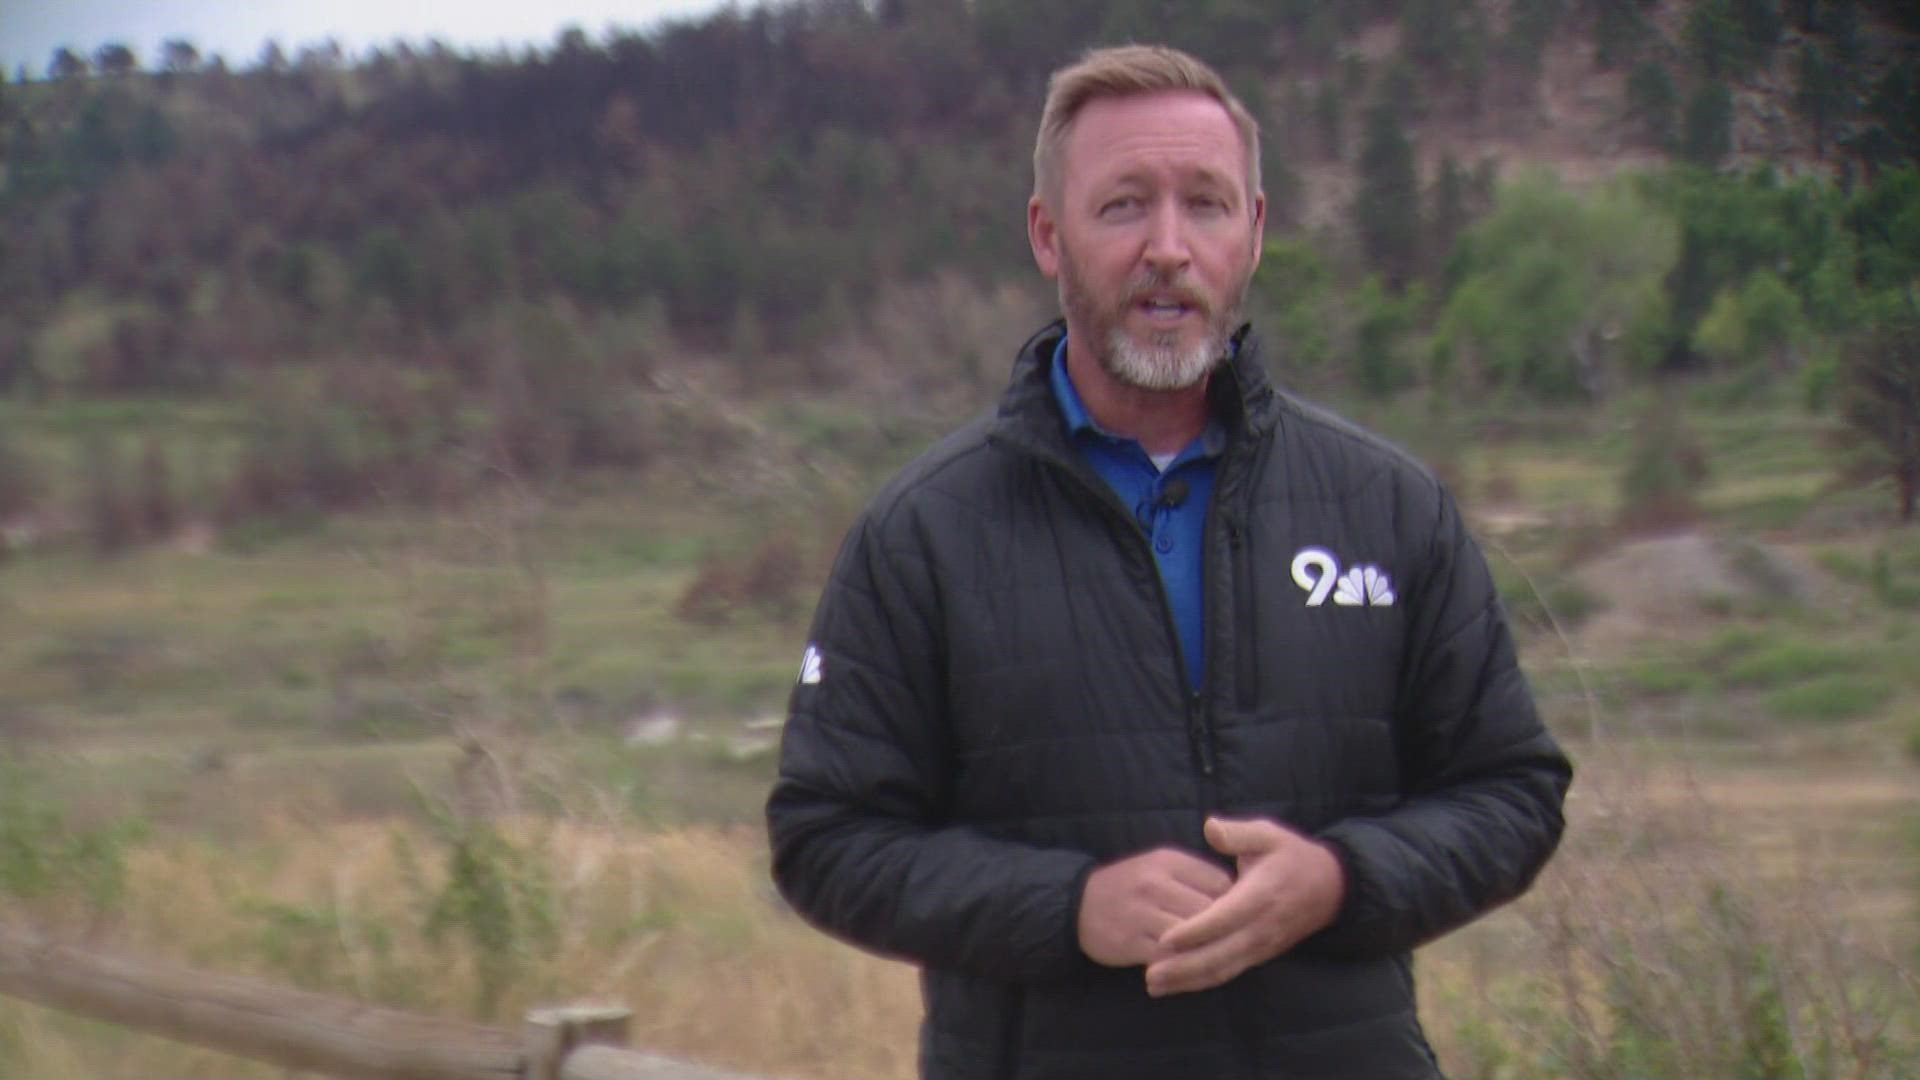 9NEWS Meteorologist Cory Reppenhagen has been monitoring severe storms and burn scars in Boulder County.